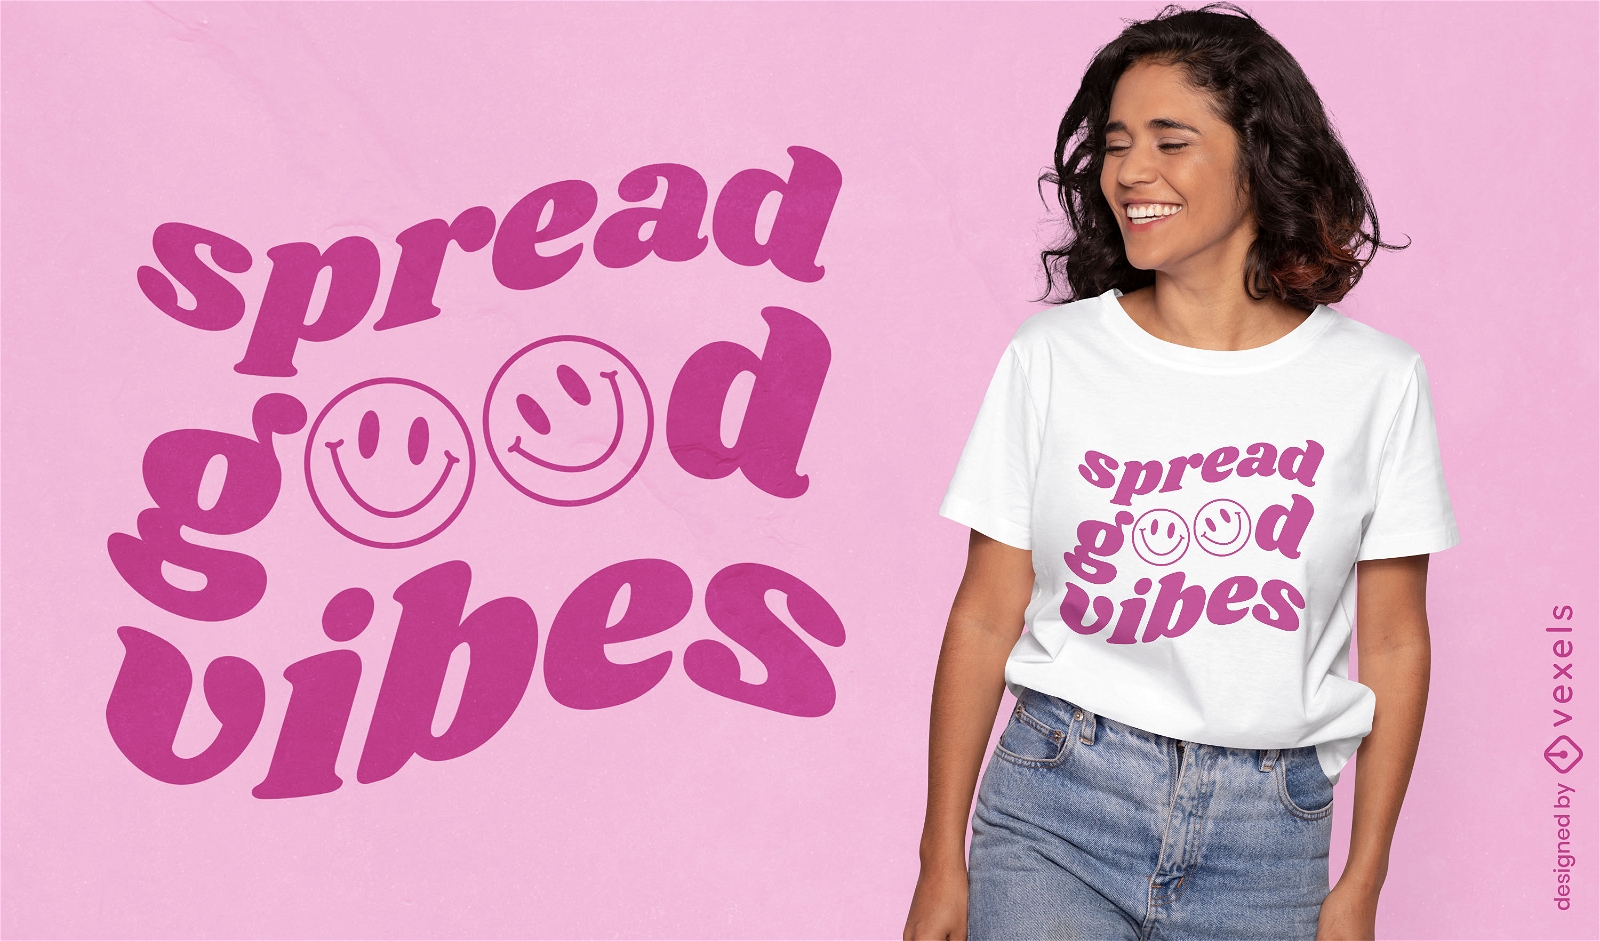 Spread good vibes quote lettering t-shirt design